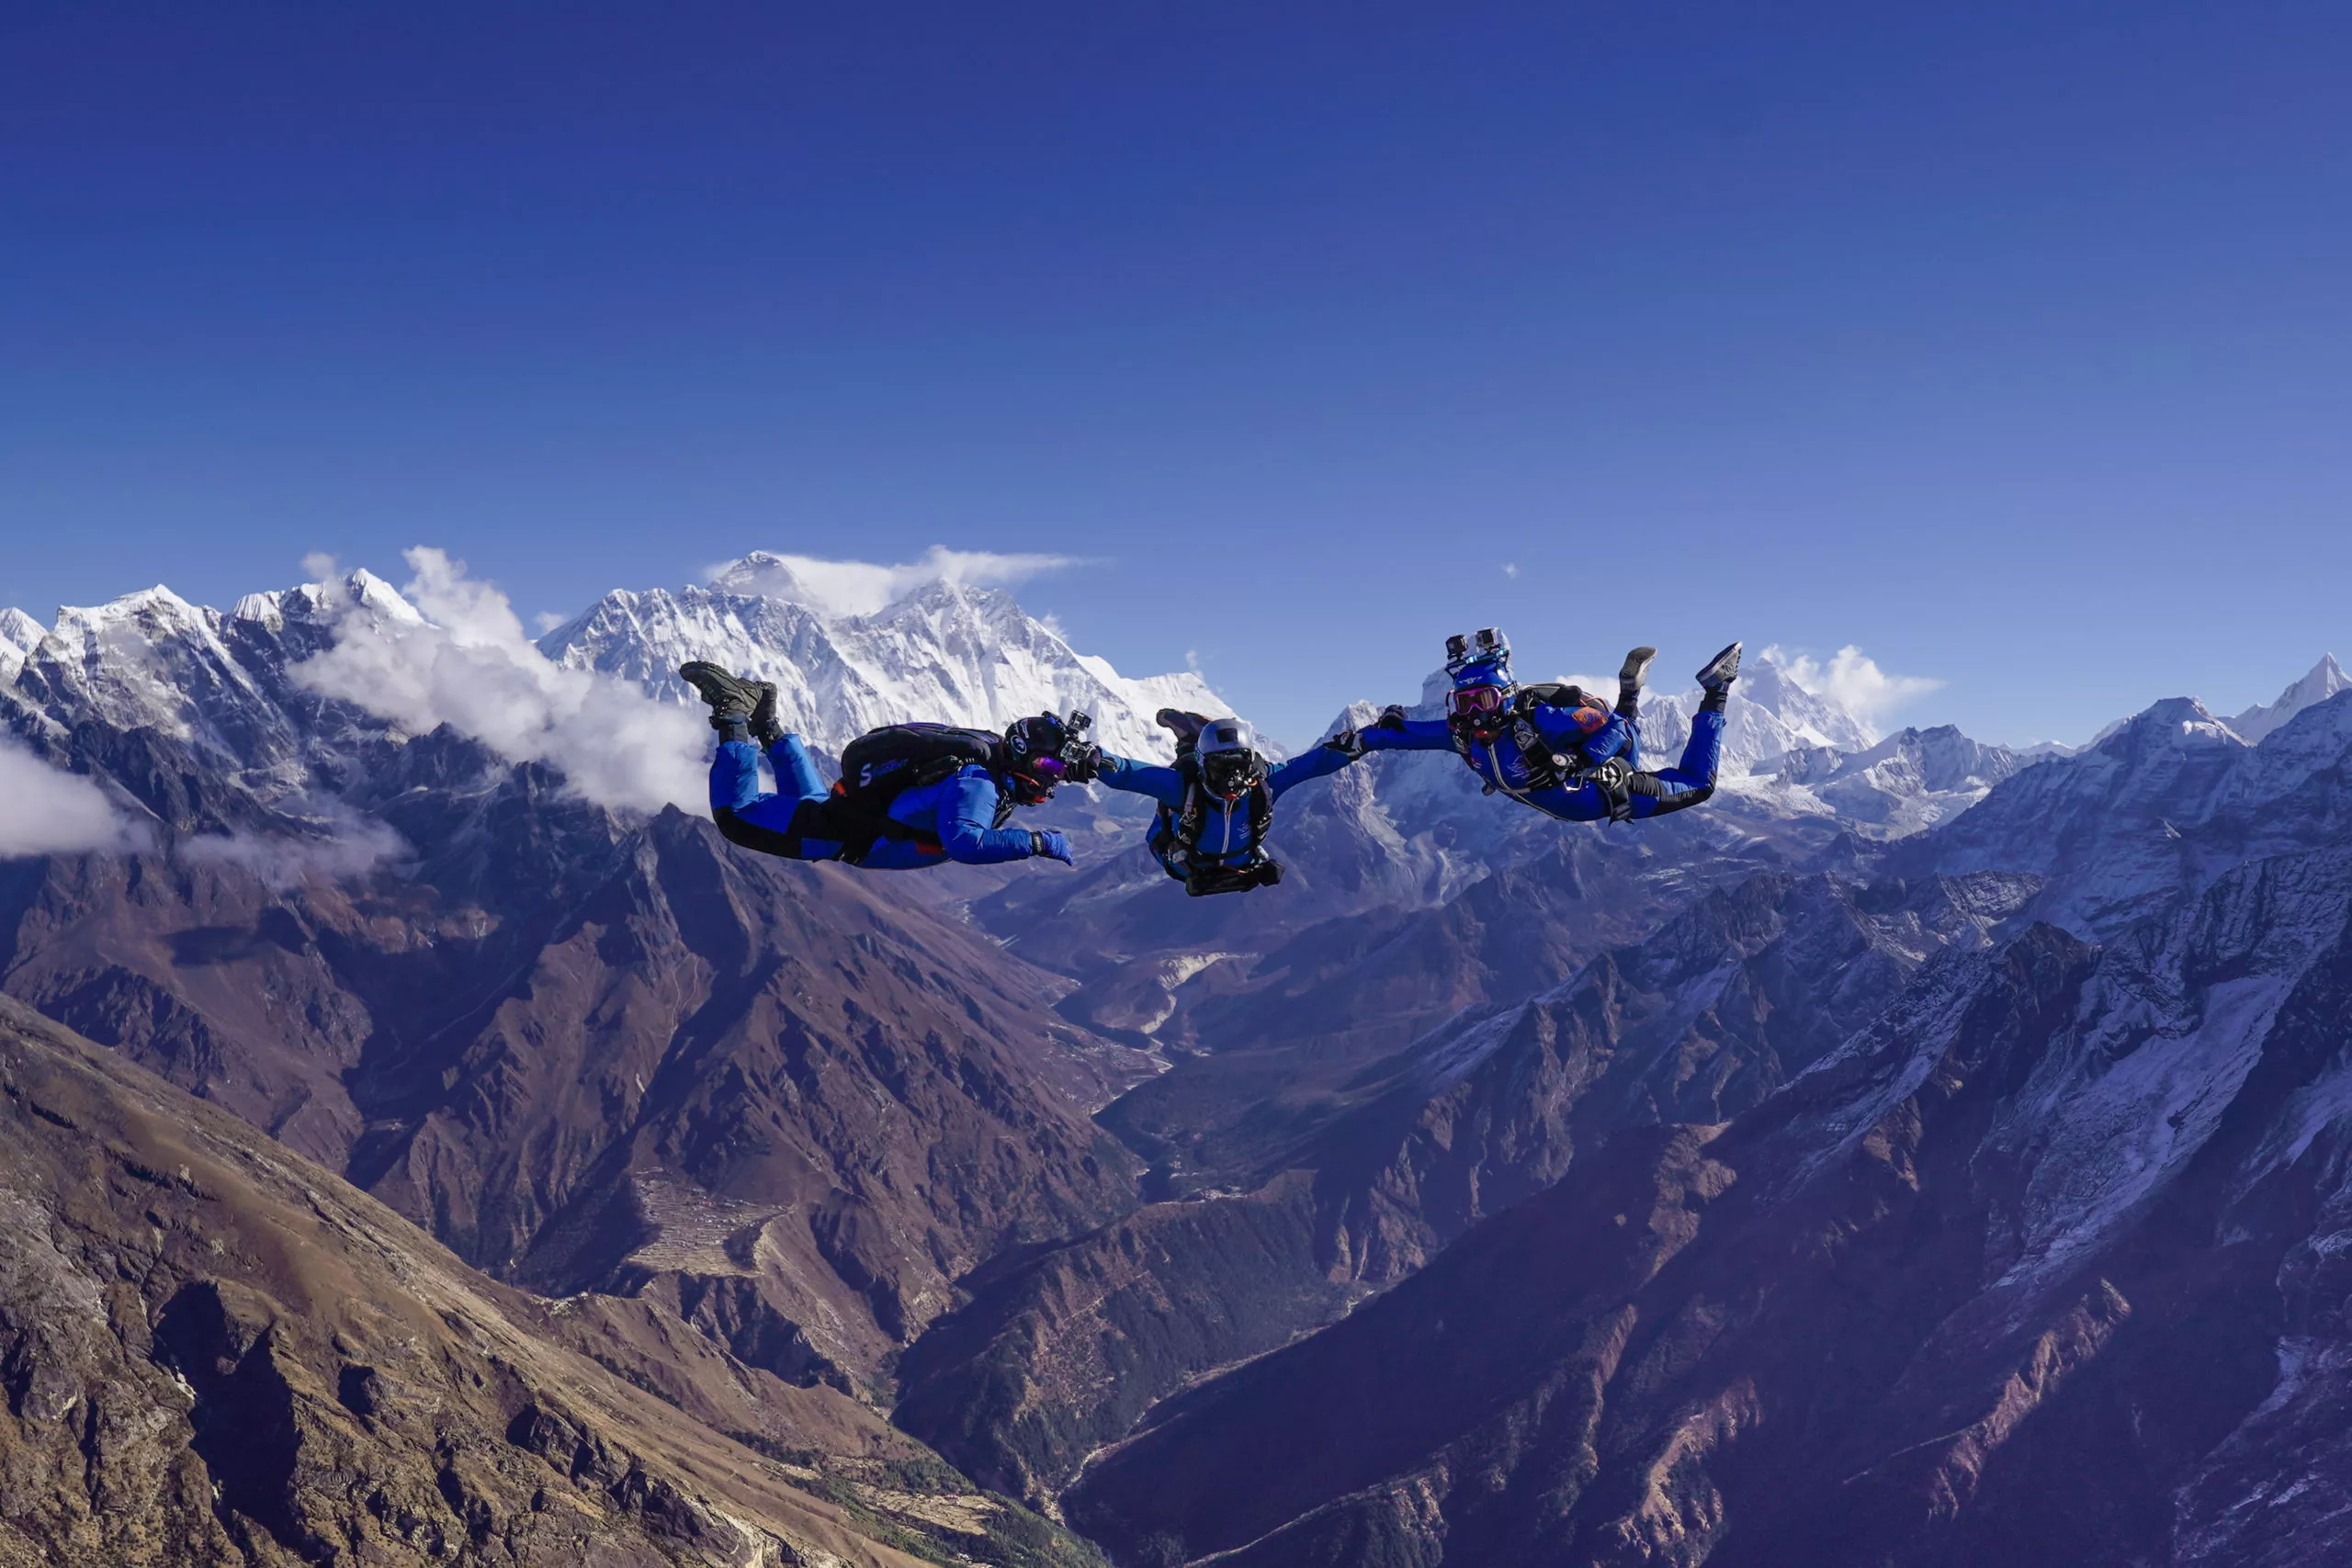 Everest Skydive Nepal in Nepal, Central Asia | Skydiving,Adrenaline Adventures - Rated 0.7